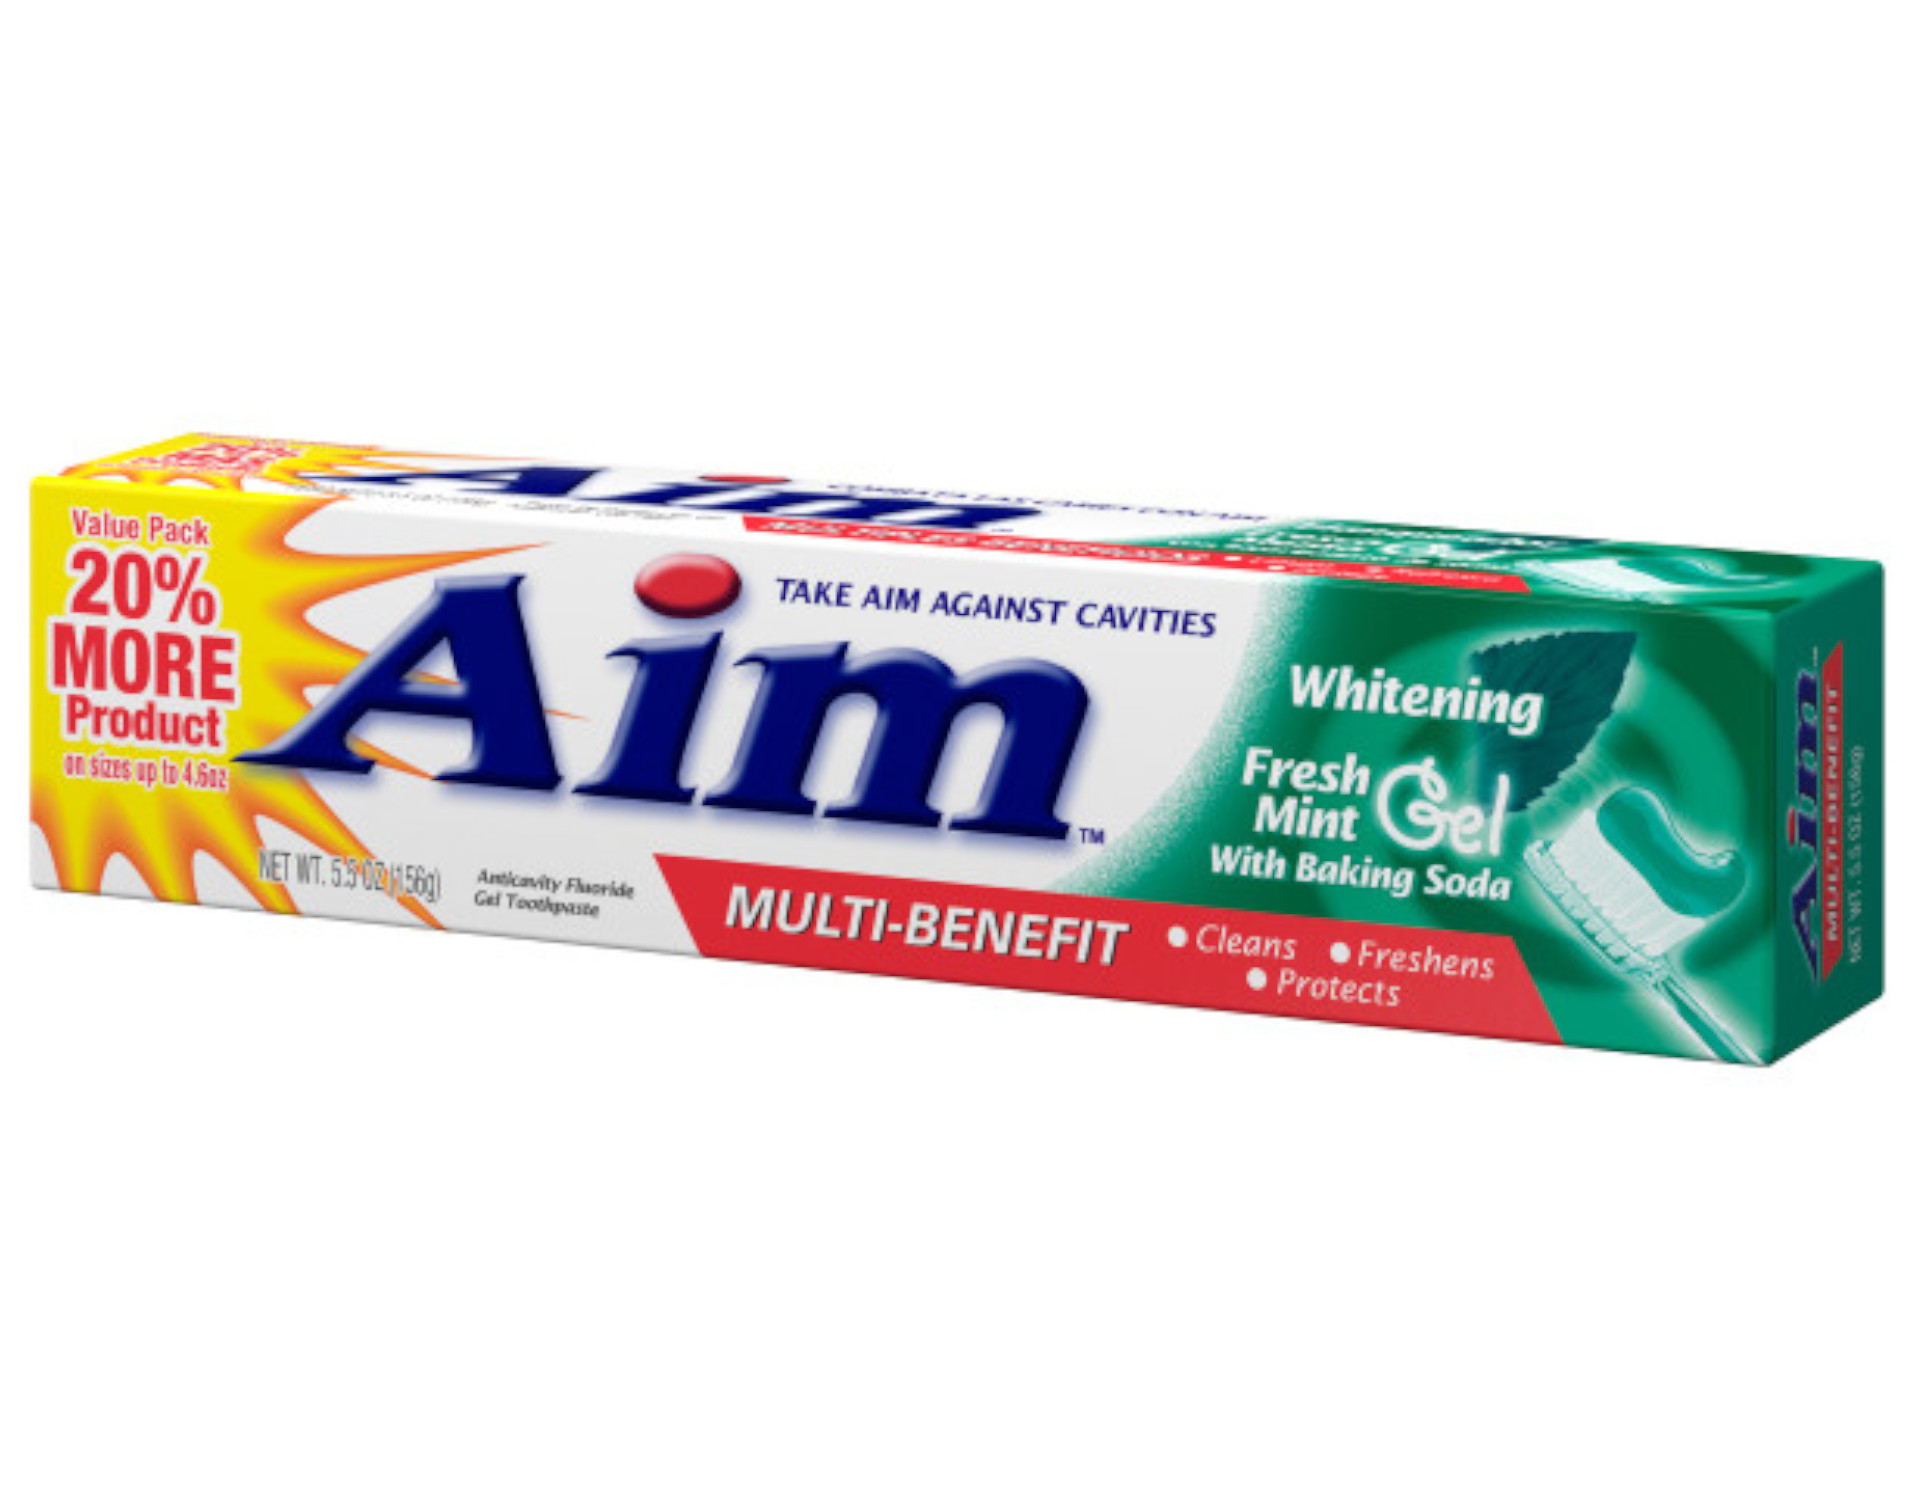 Aim Multi-Benefit Whitening Fresh Mint Gel Toothpaste with Baking Soda, 5.5 oz, 2 Pack - image 3 of 3